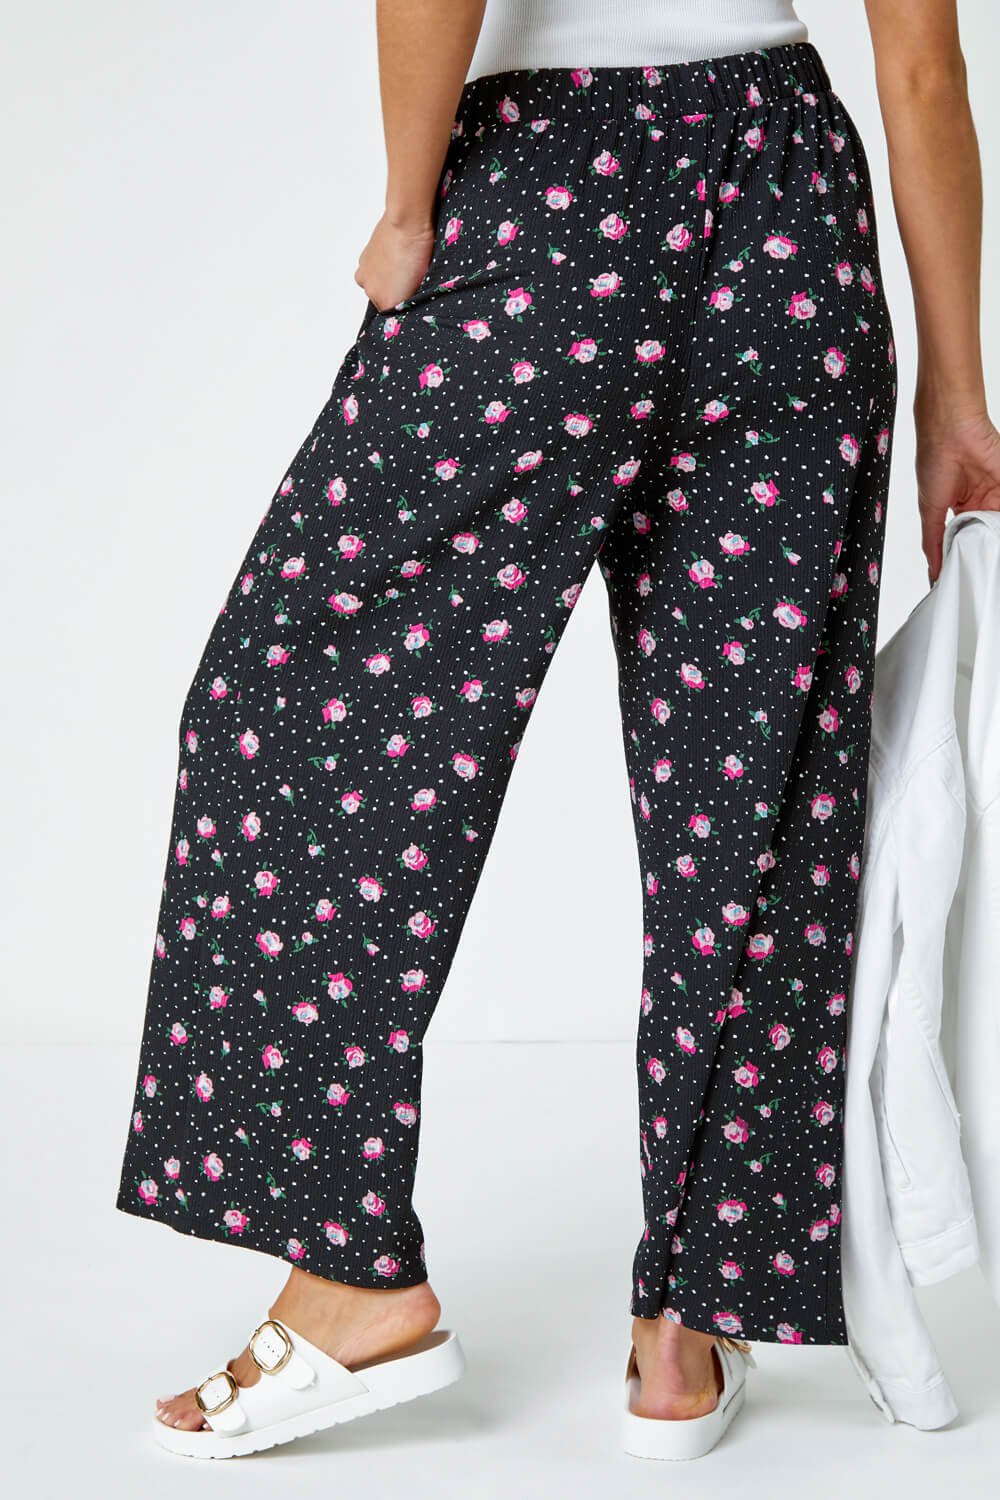 Black Ditsy Floral Print Stretch Culottes, Image 3 of 5